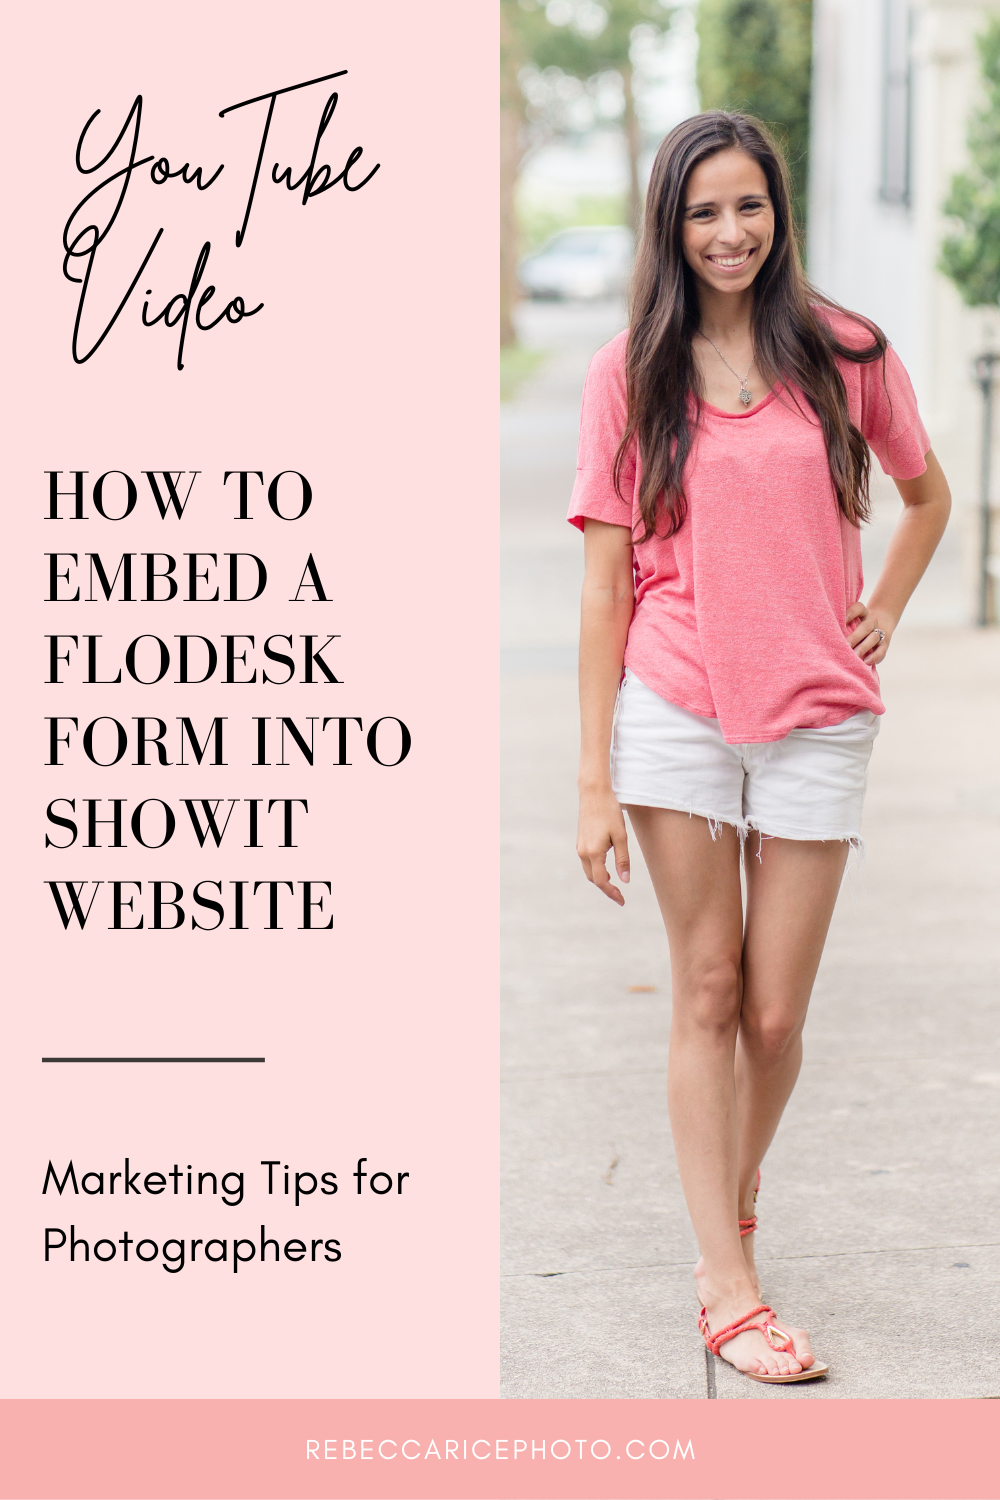 How to Embed a Flodesk Form into Showit Website | Marketing Tip